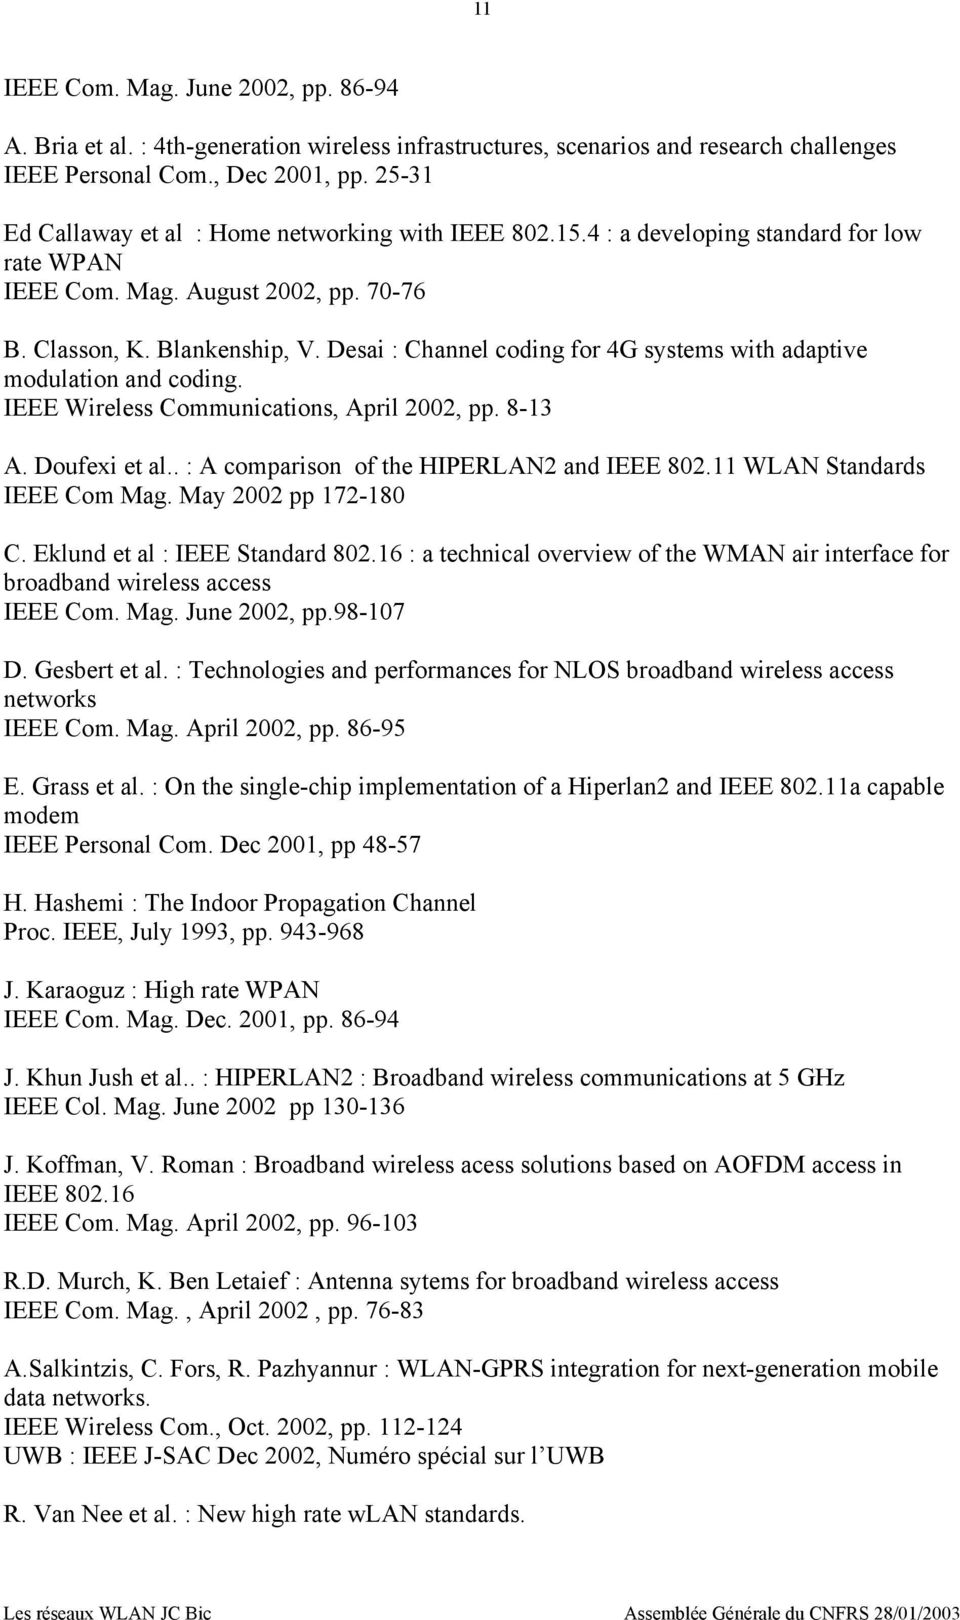 Desai : Channel coding for 4G systems with adaptive modulation and coding. IEEE Wireless Communications, April 2002, pp. 8-13 A. Doufexi et al.. : A comparison of the HIPERLAN2 and IEEE 802.